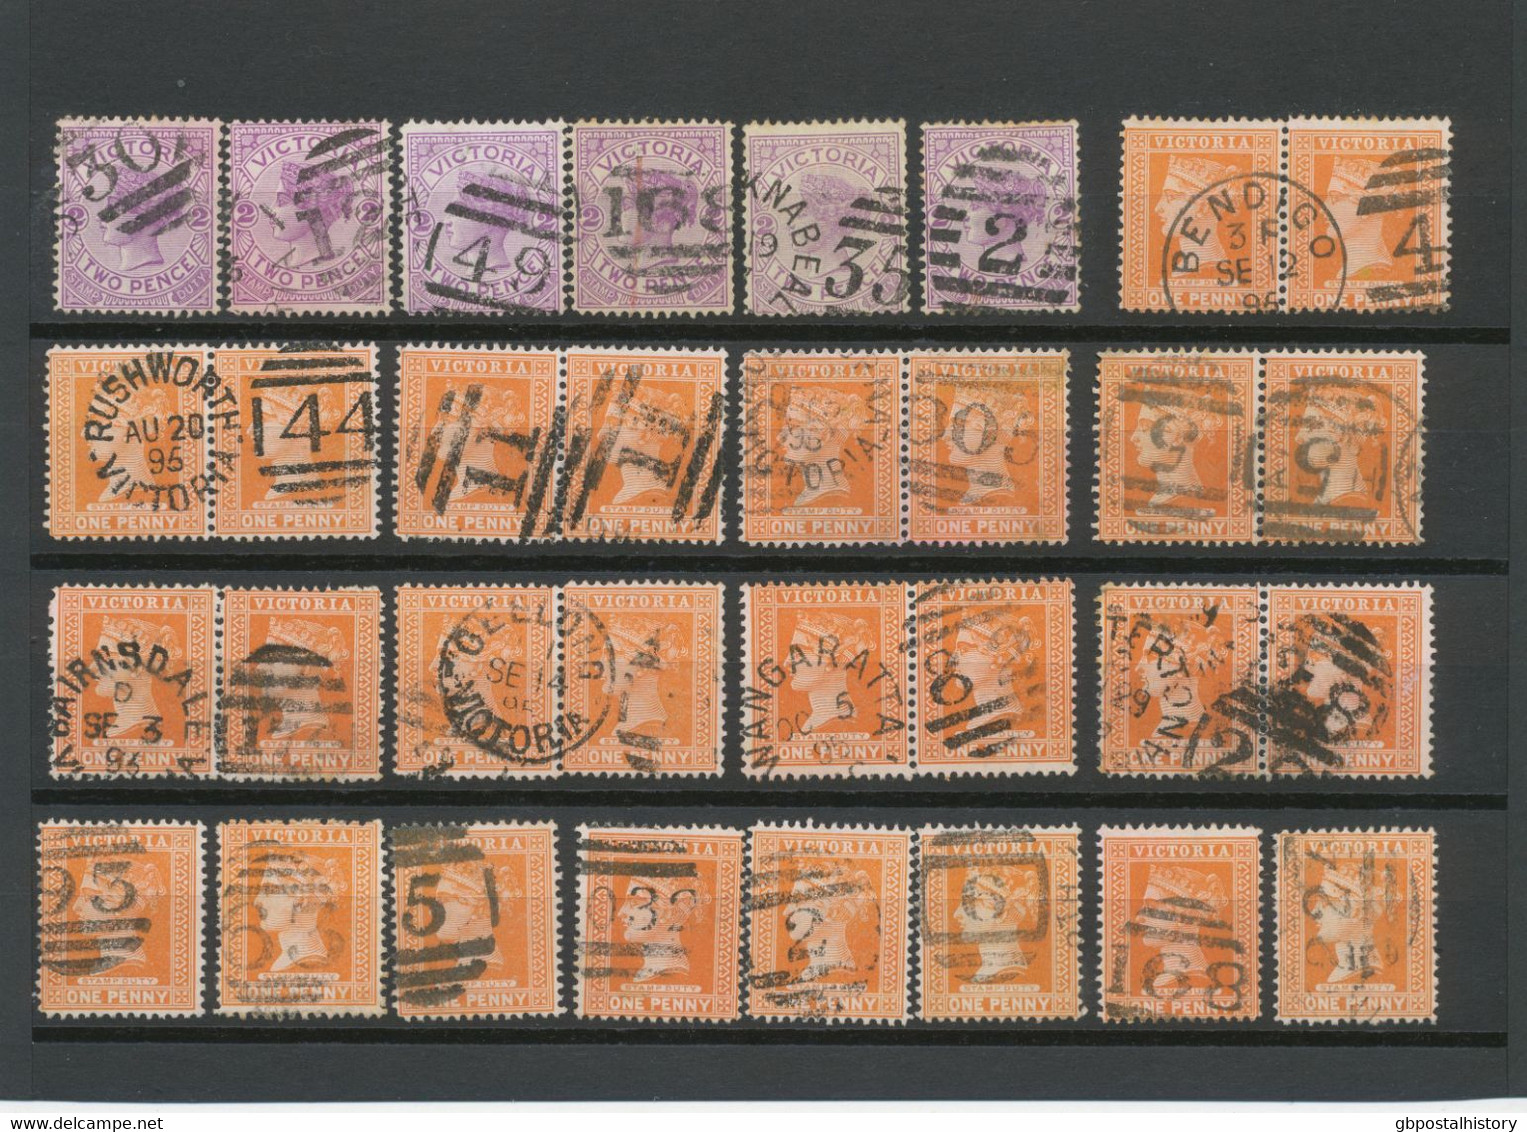 COLLECTION AUSTRALIA OF CLASSIC POSTMARKS (NUMERALS, DUPLEX, TPO (Railway), R (Registered) And Some Others) Ca. 1880/190 - Collezioni